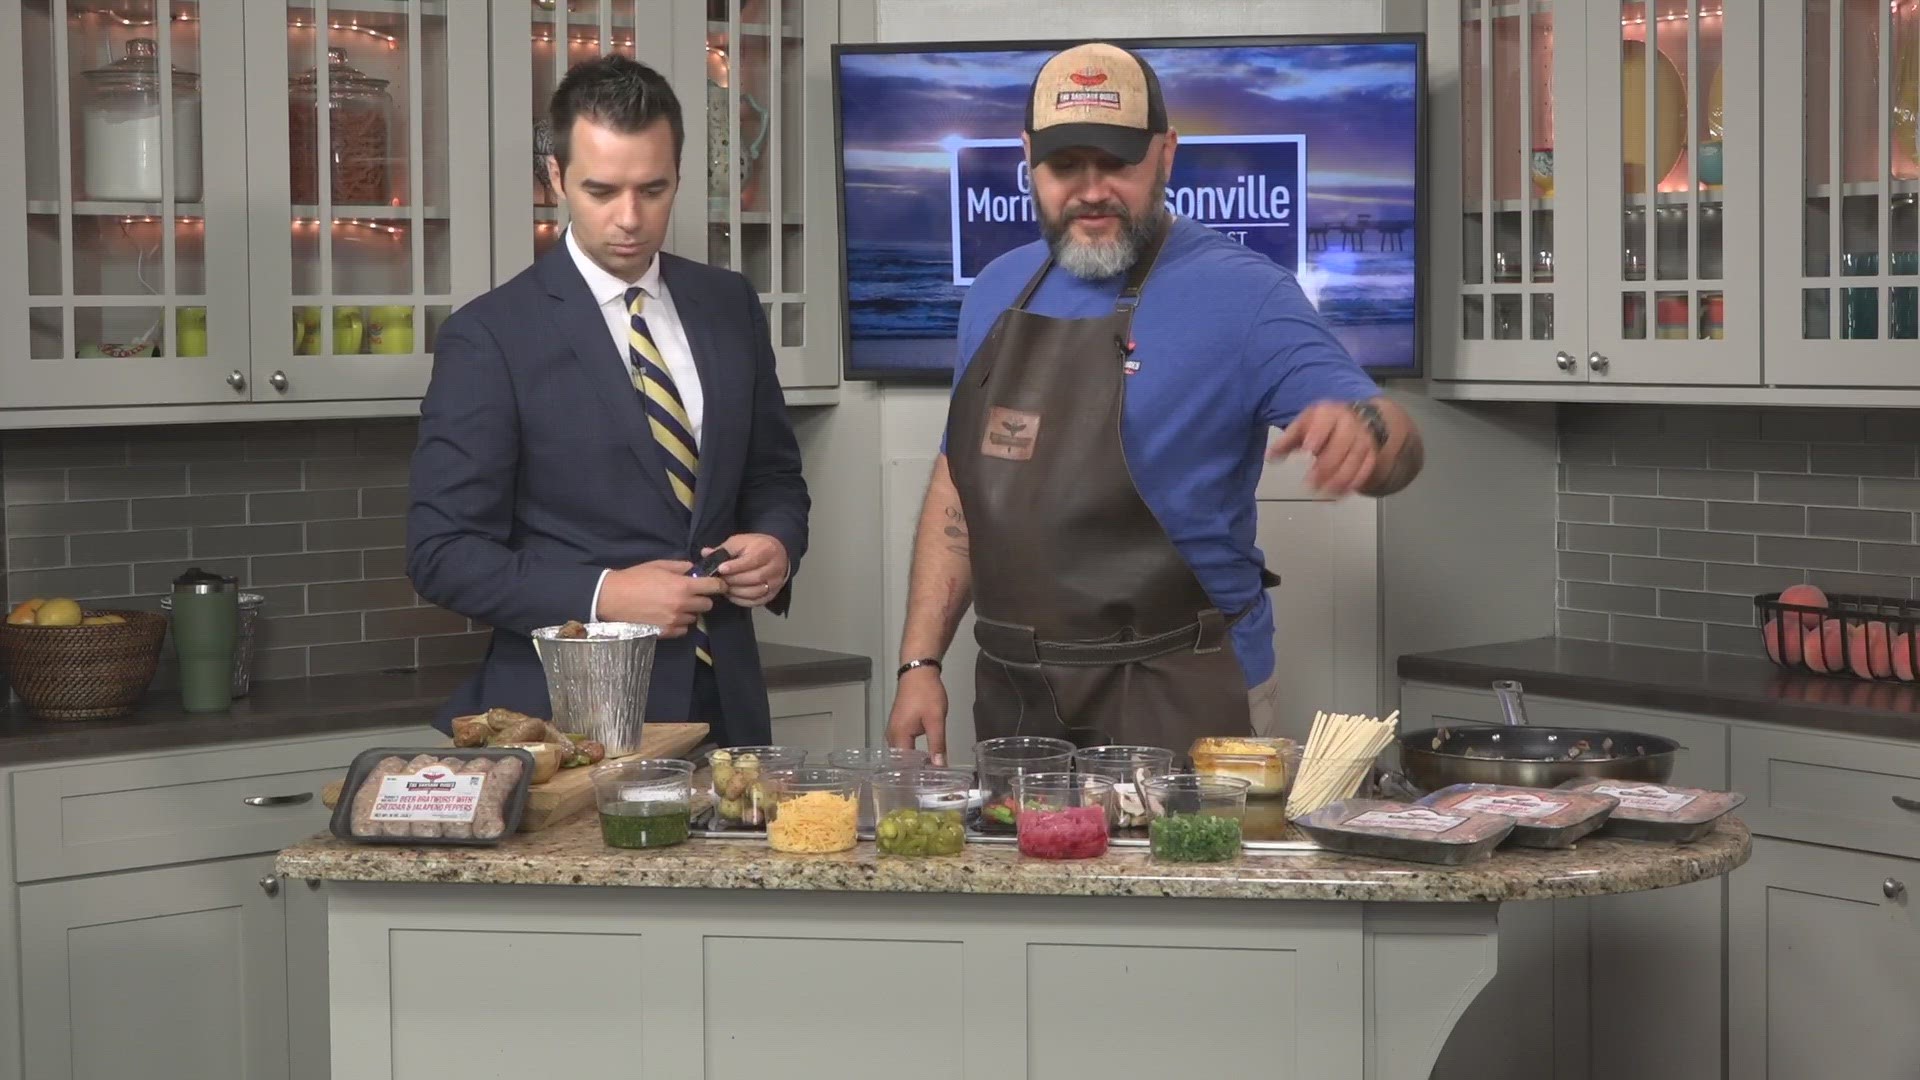 The Sausage Dudes are two Jacksonville residents, Patryk Krasinska (The Chef Dude) and Paul Martinez (The Marketing Dude). Patryk joined us on GMJ.